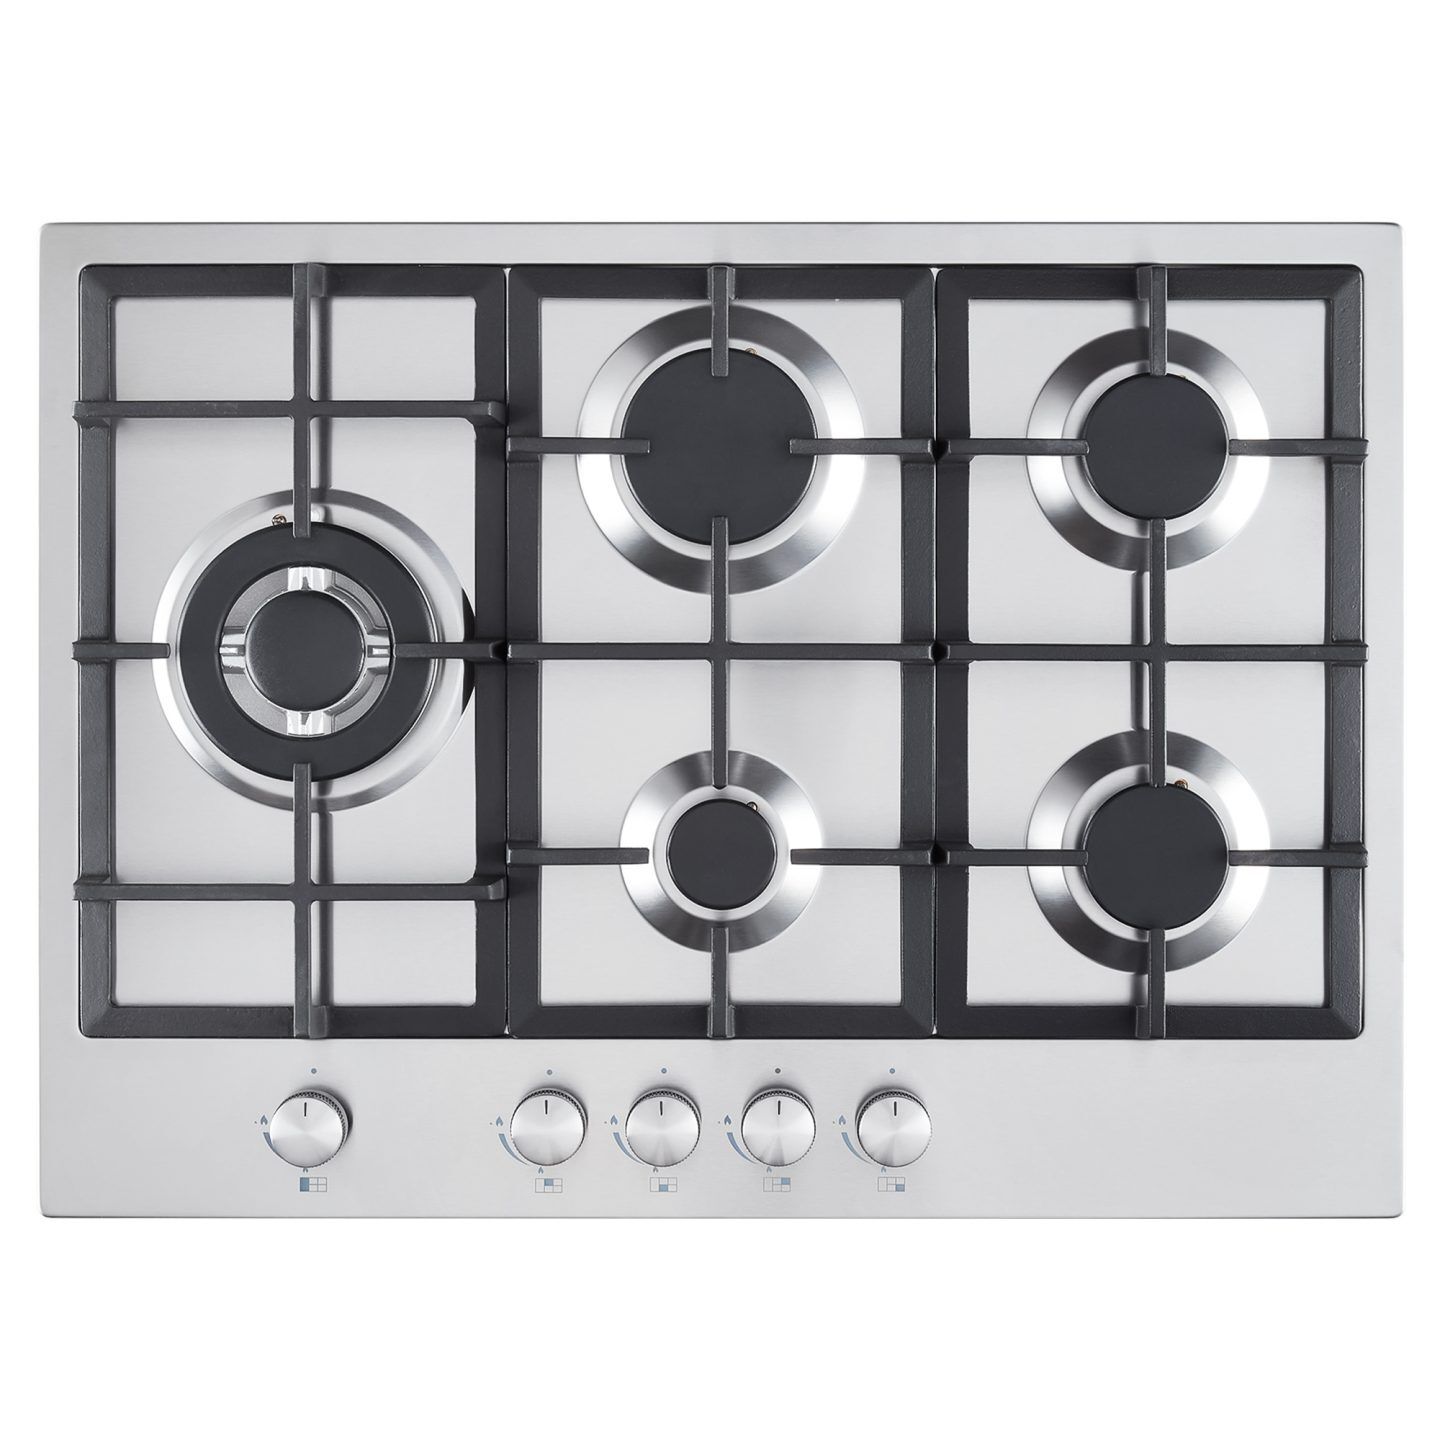 Cookology 70cm 5 Burner Gas Hob With Cast Iron Supports - Stainless Steel